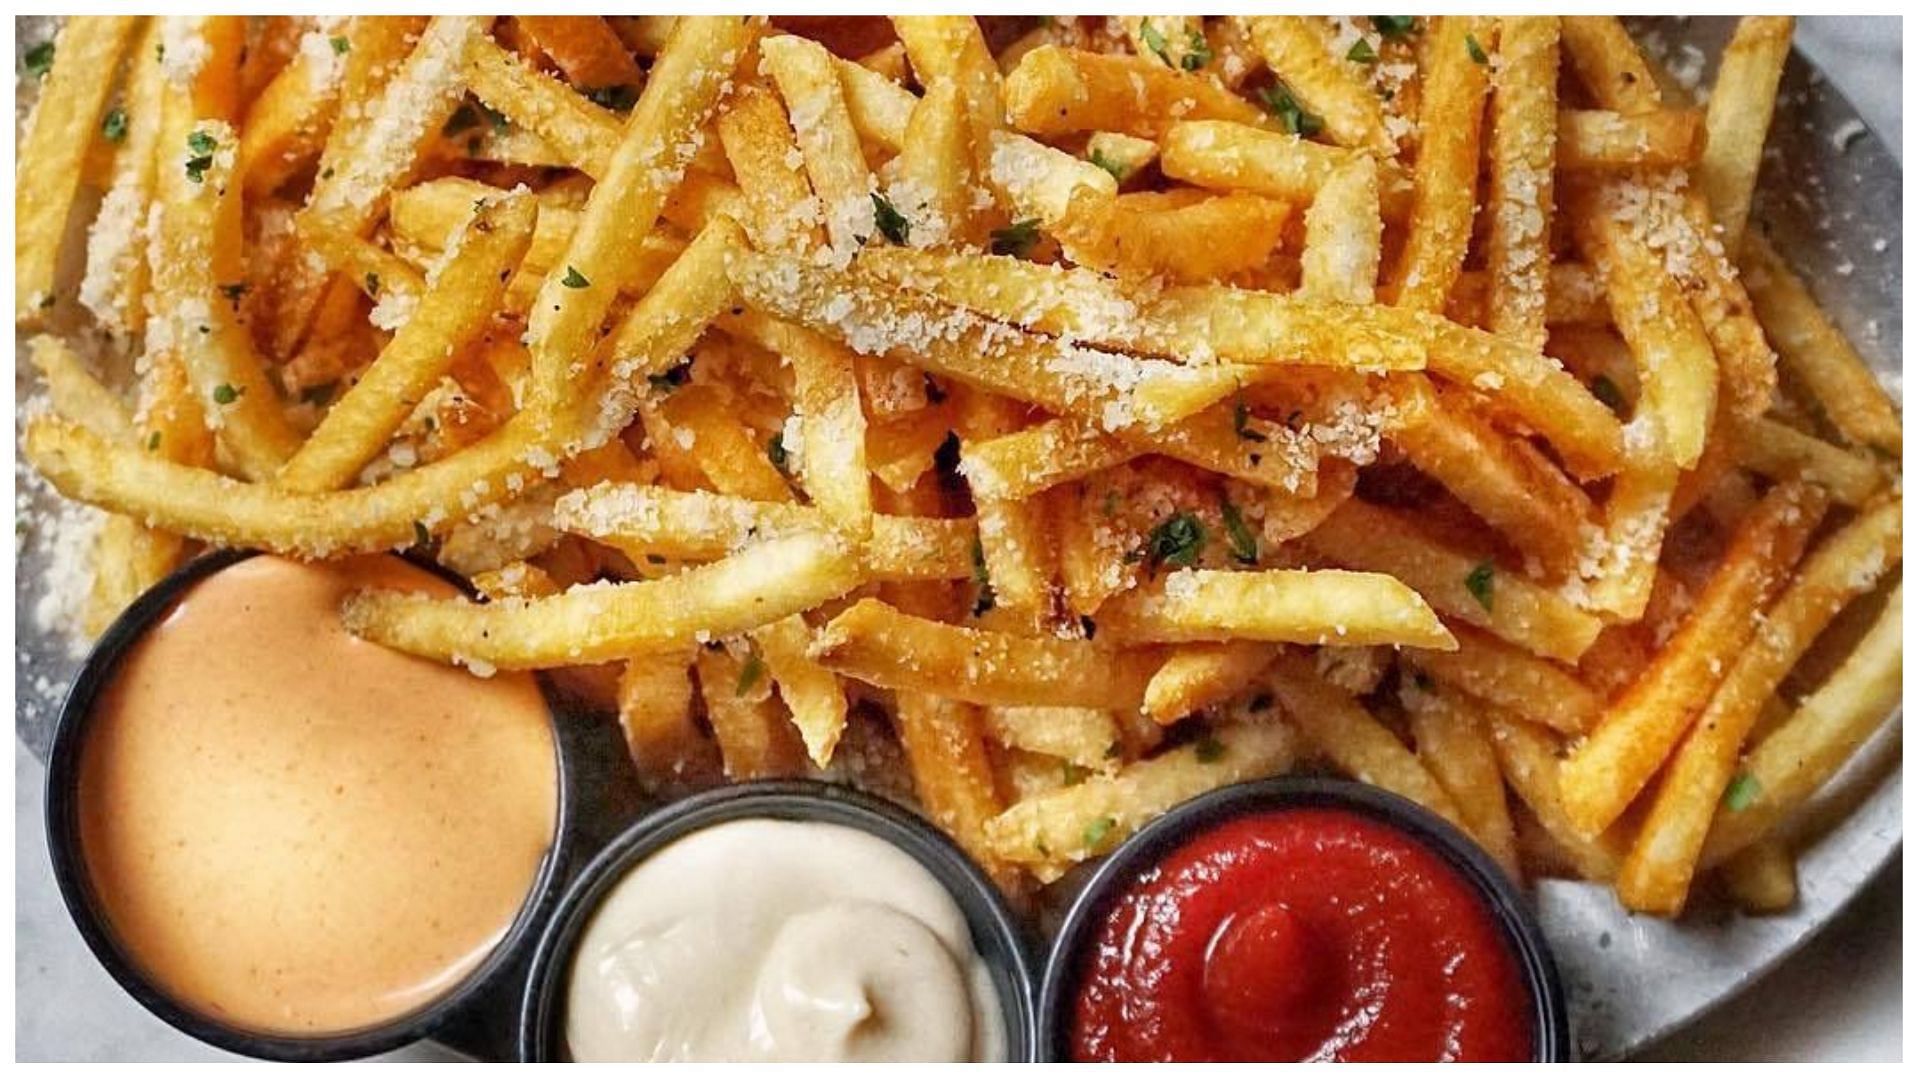 National French fries day is celebrated on July 13 (Image via Pinterest/Robin Cathleen Botha)